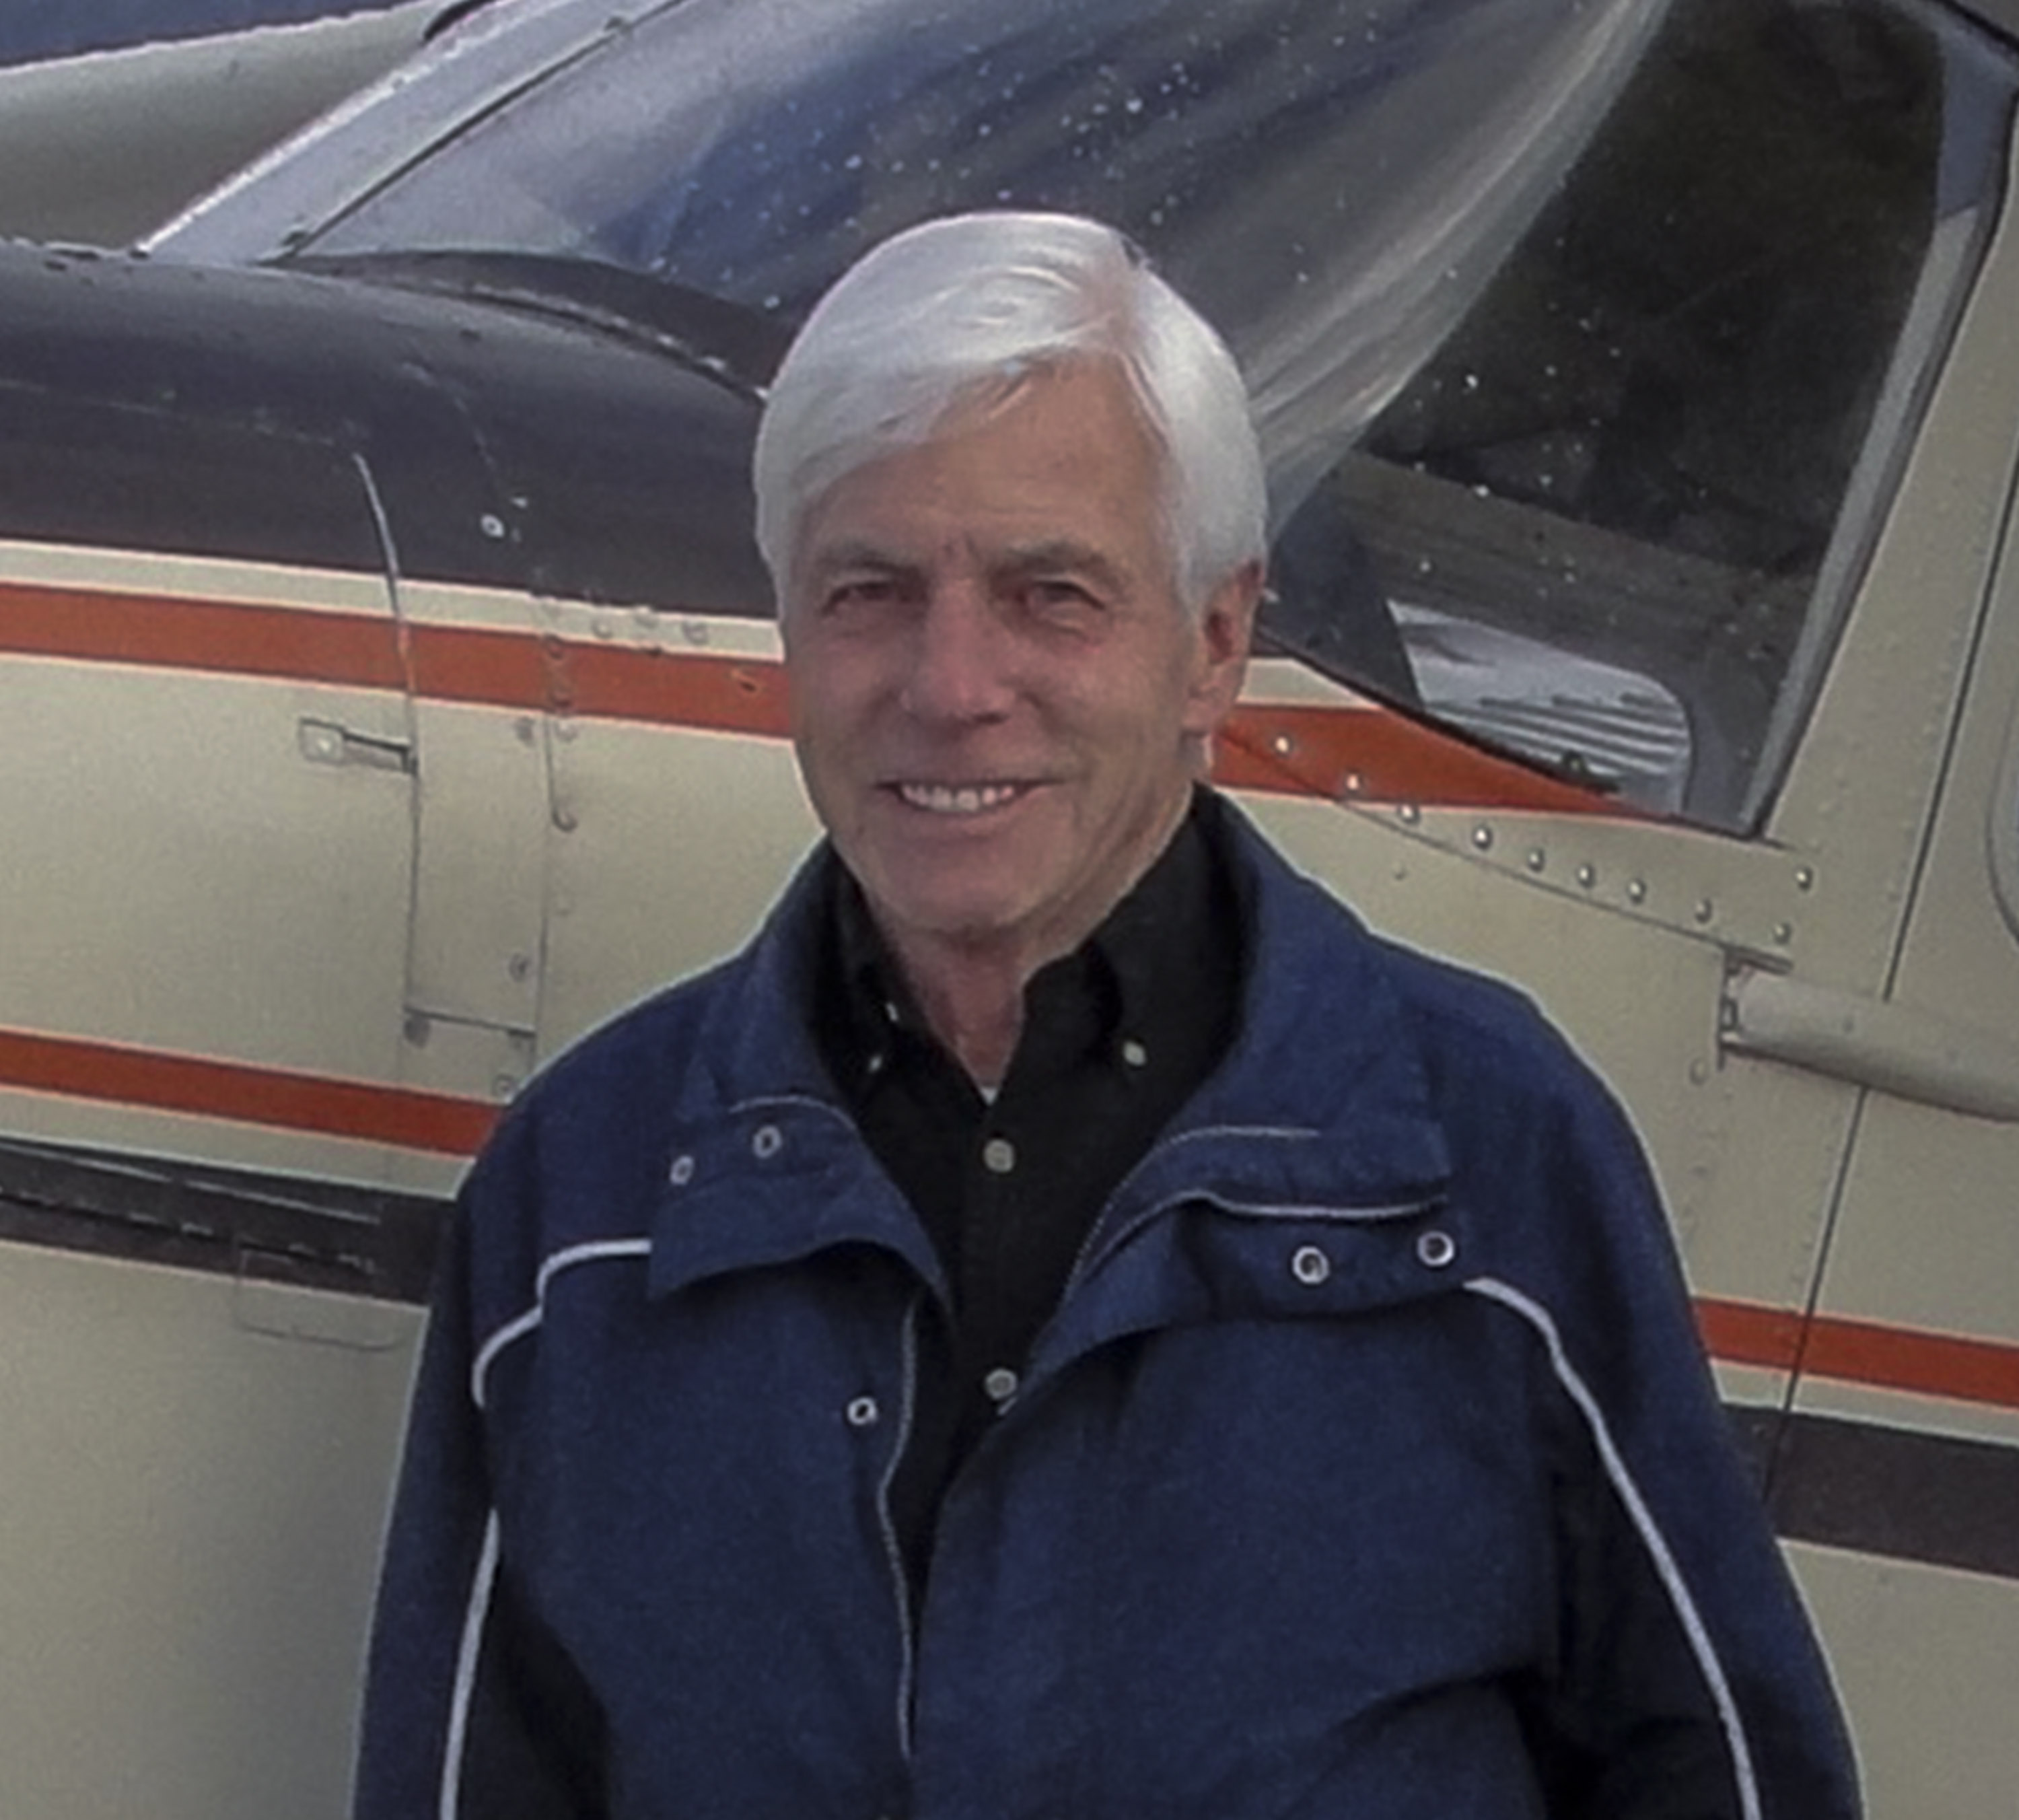 Portrait of a silver haired man standing in front of an aeroplane.